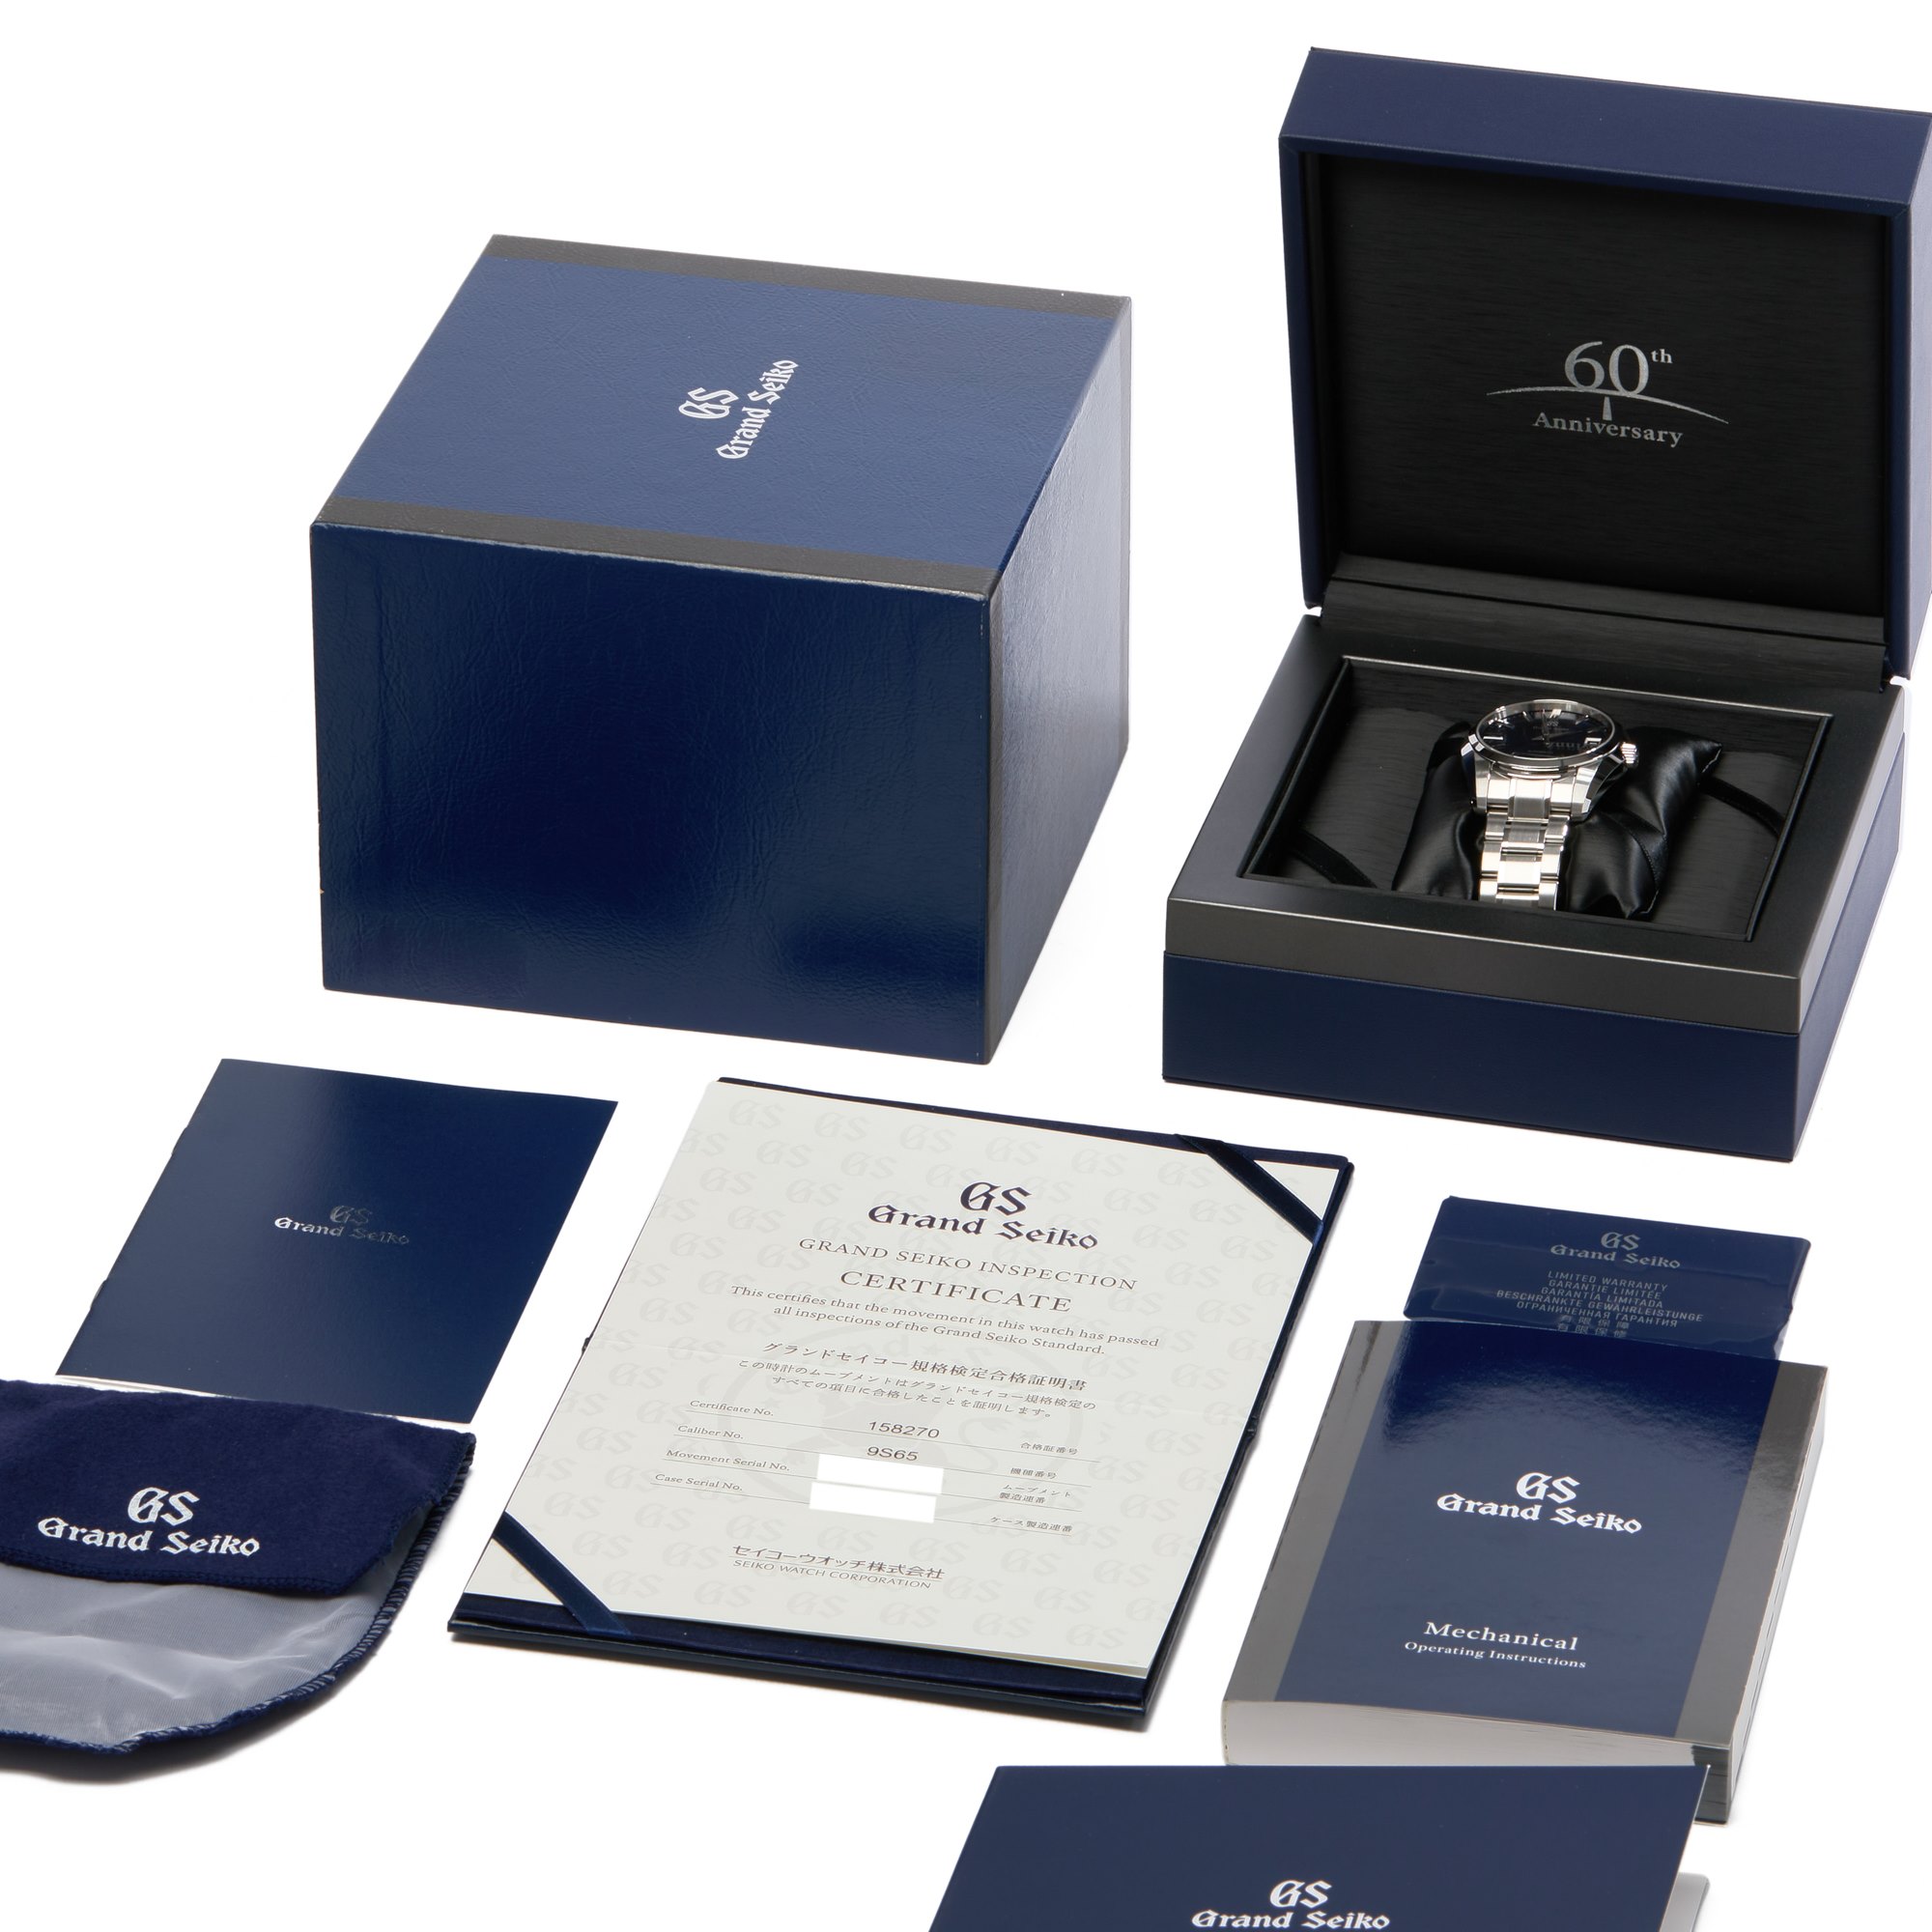 Seiko Grand Seiko Heritage 60th Anniversary Limited Edition of 2500 Pcs Stainless Steel SBGR321G